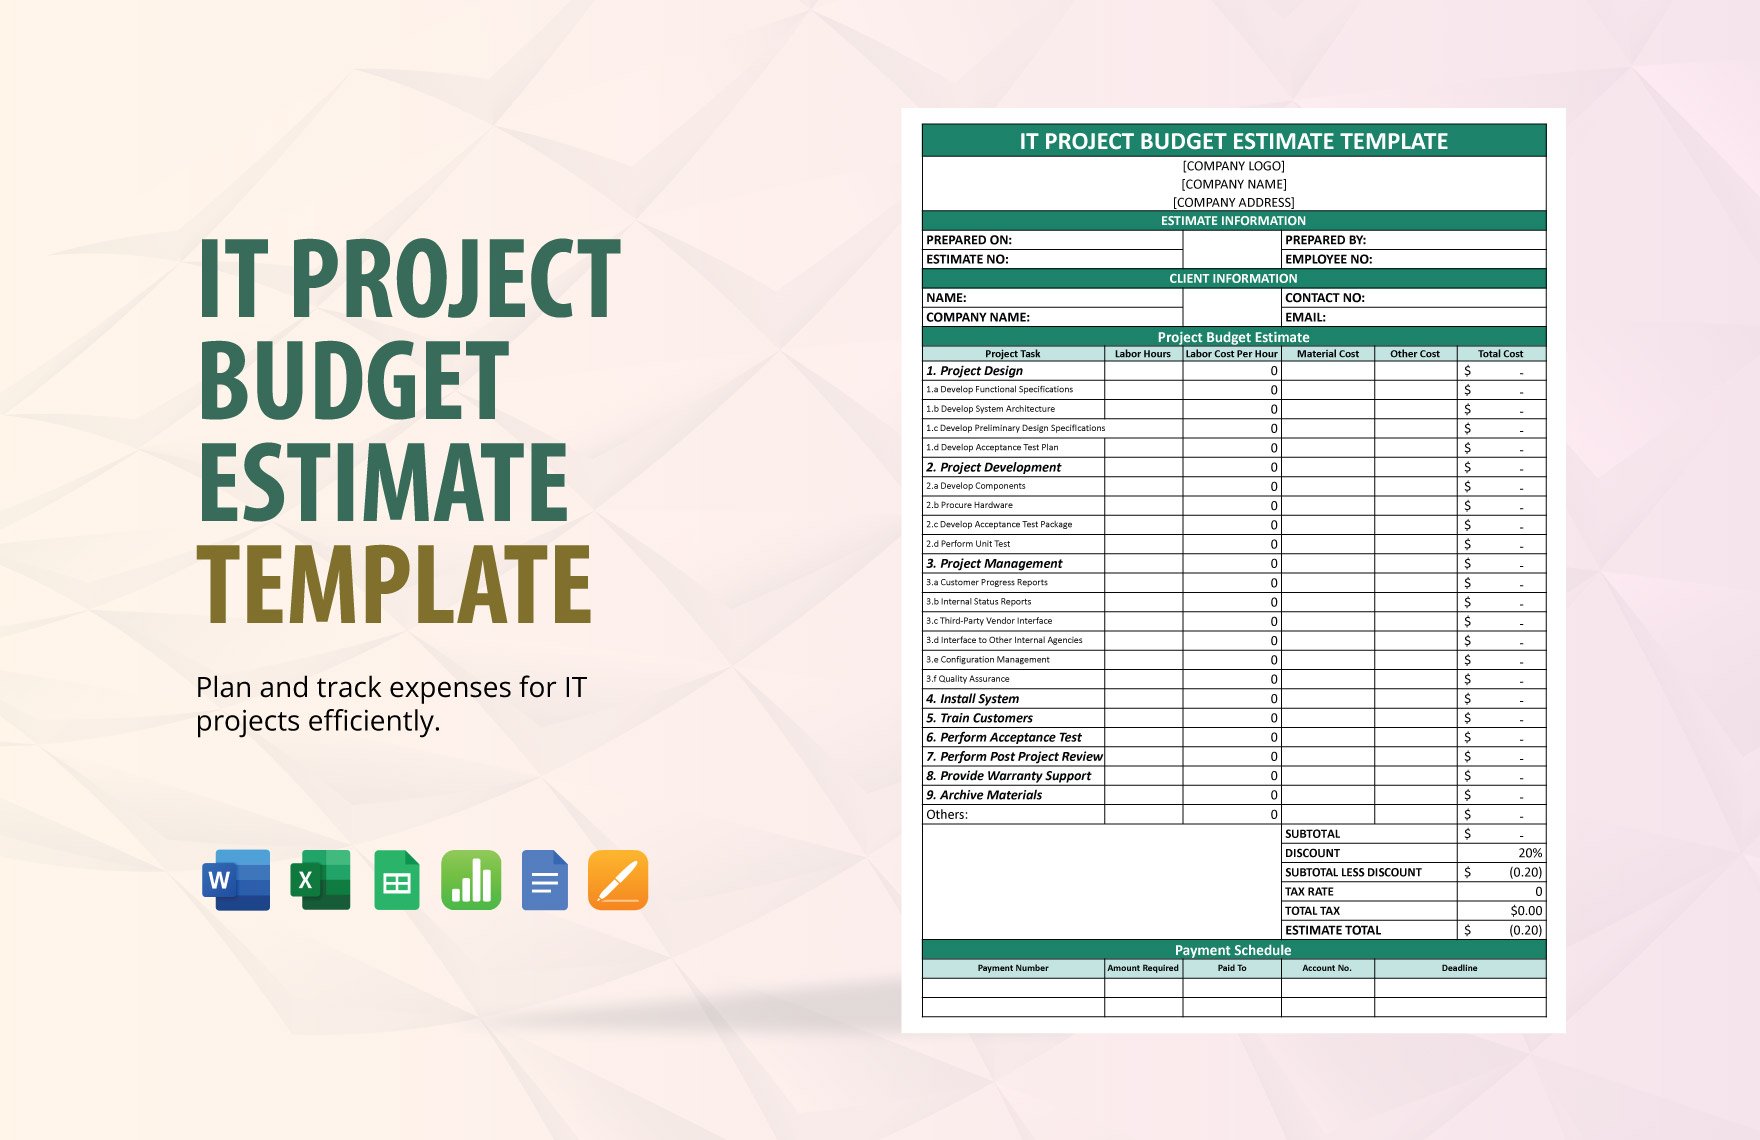 IT Project Budget Estimate Template in Word, Google Docs, Excel, Google Sheets, Apple Pages, Apple Numbers